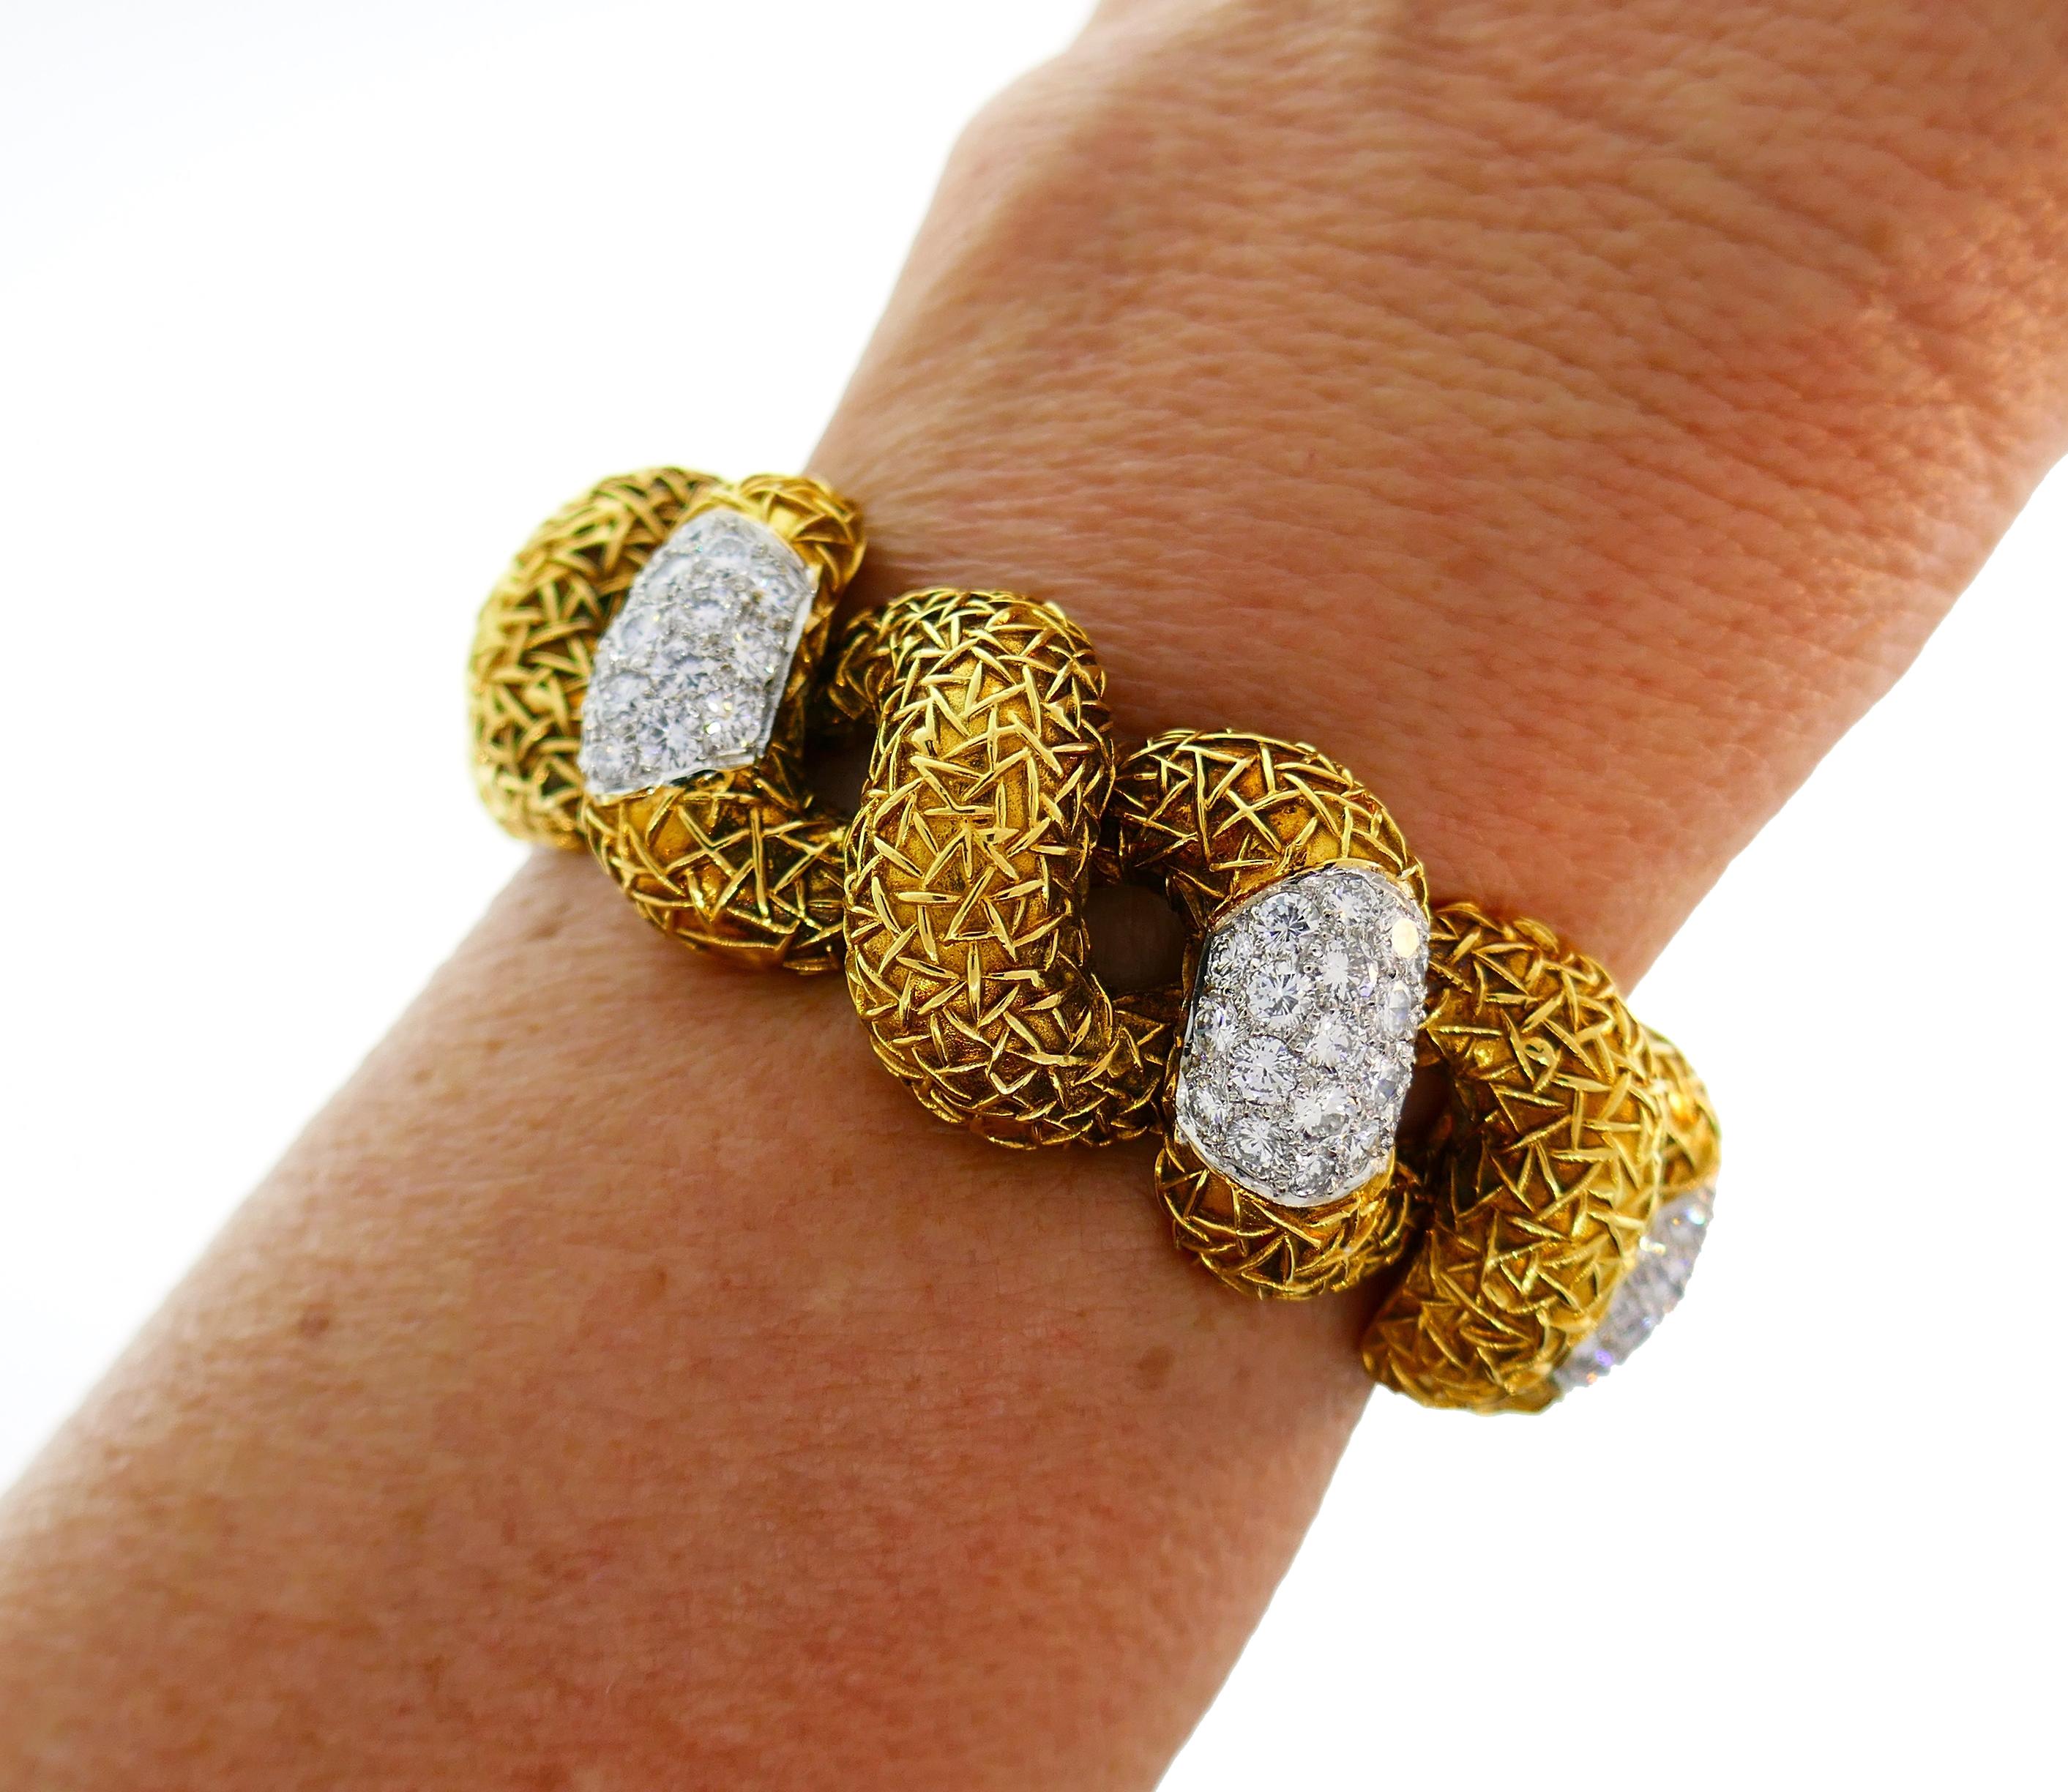 A stunning vintage bracelet created by Wander, Paris in the 1970s. Bold yet elegant and wearable, the bracelet is a great addition to your jewelry collection. Highly textured and articulated, the bracelet can be worn both, day and night. Due to a